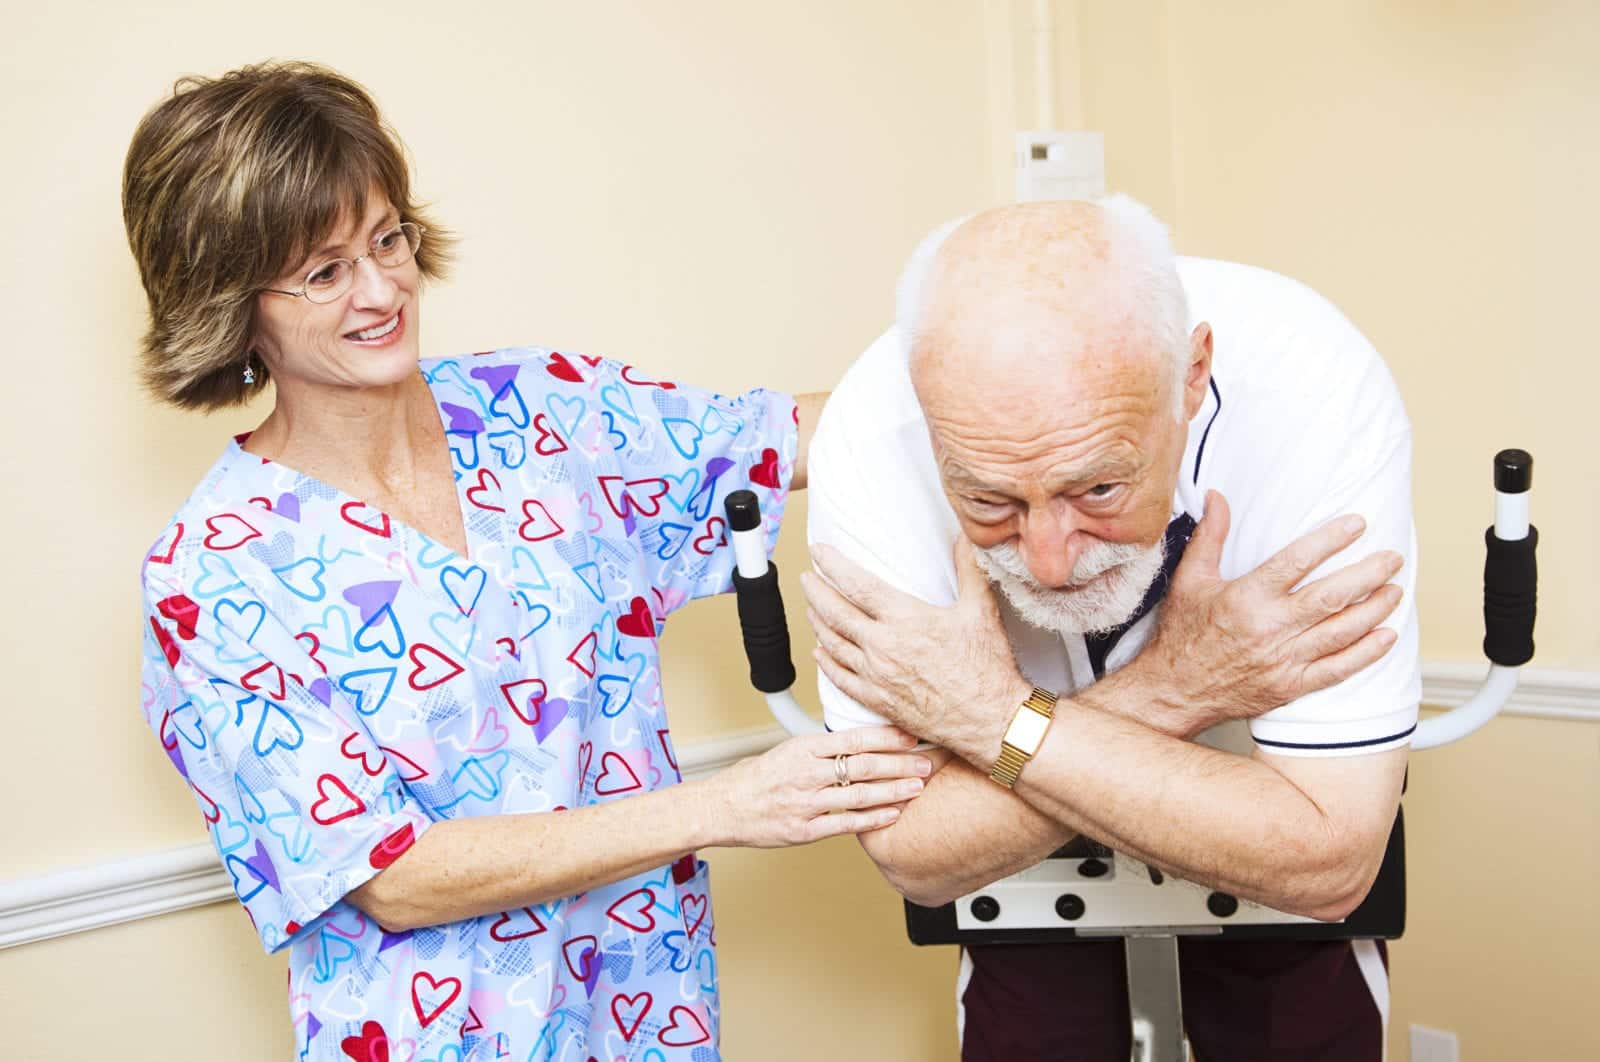 does medicare cover physical therapy for back pain